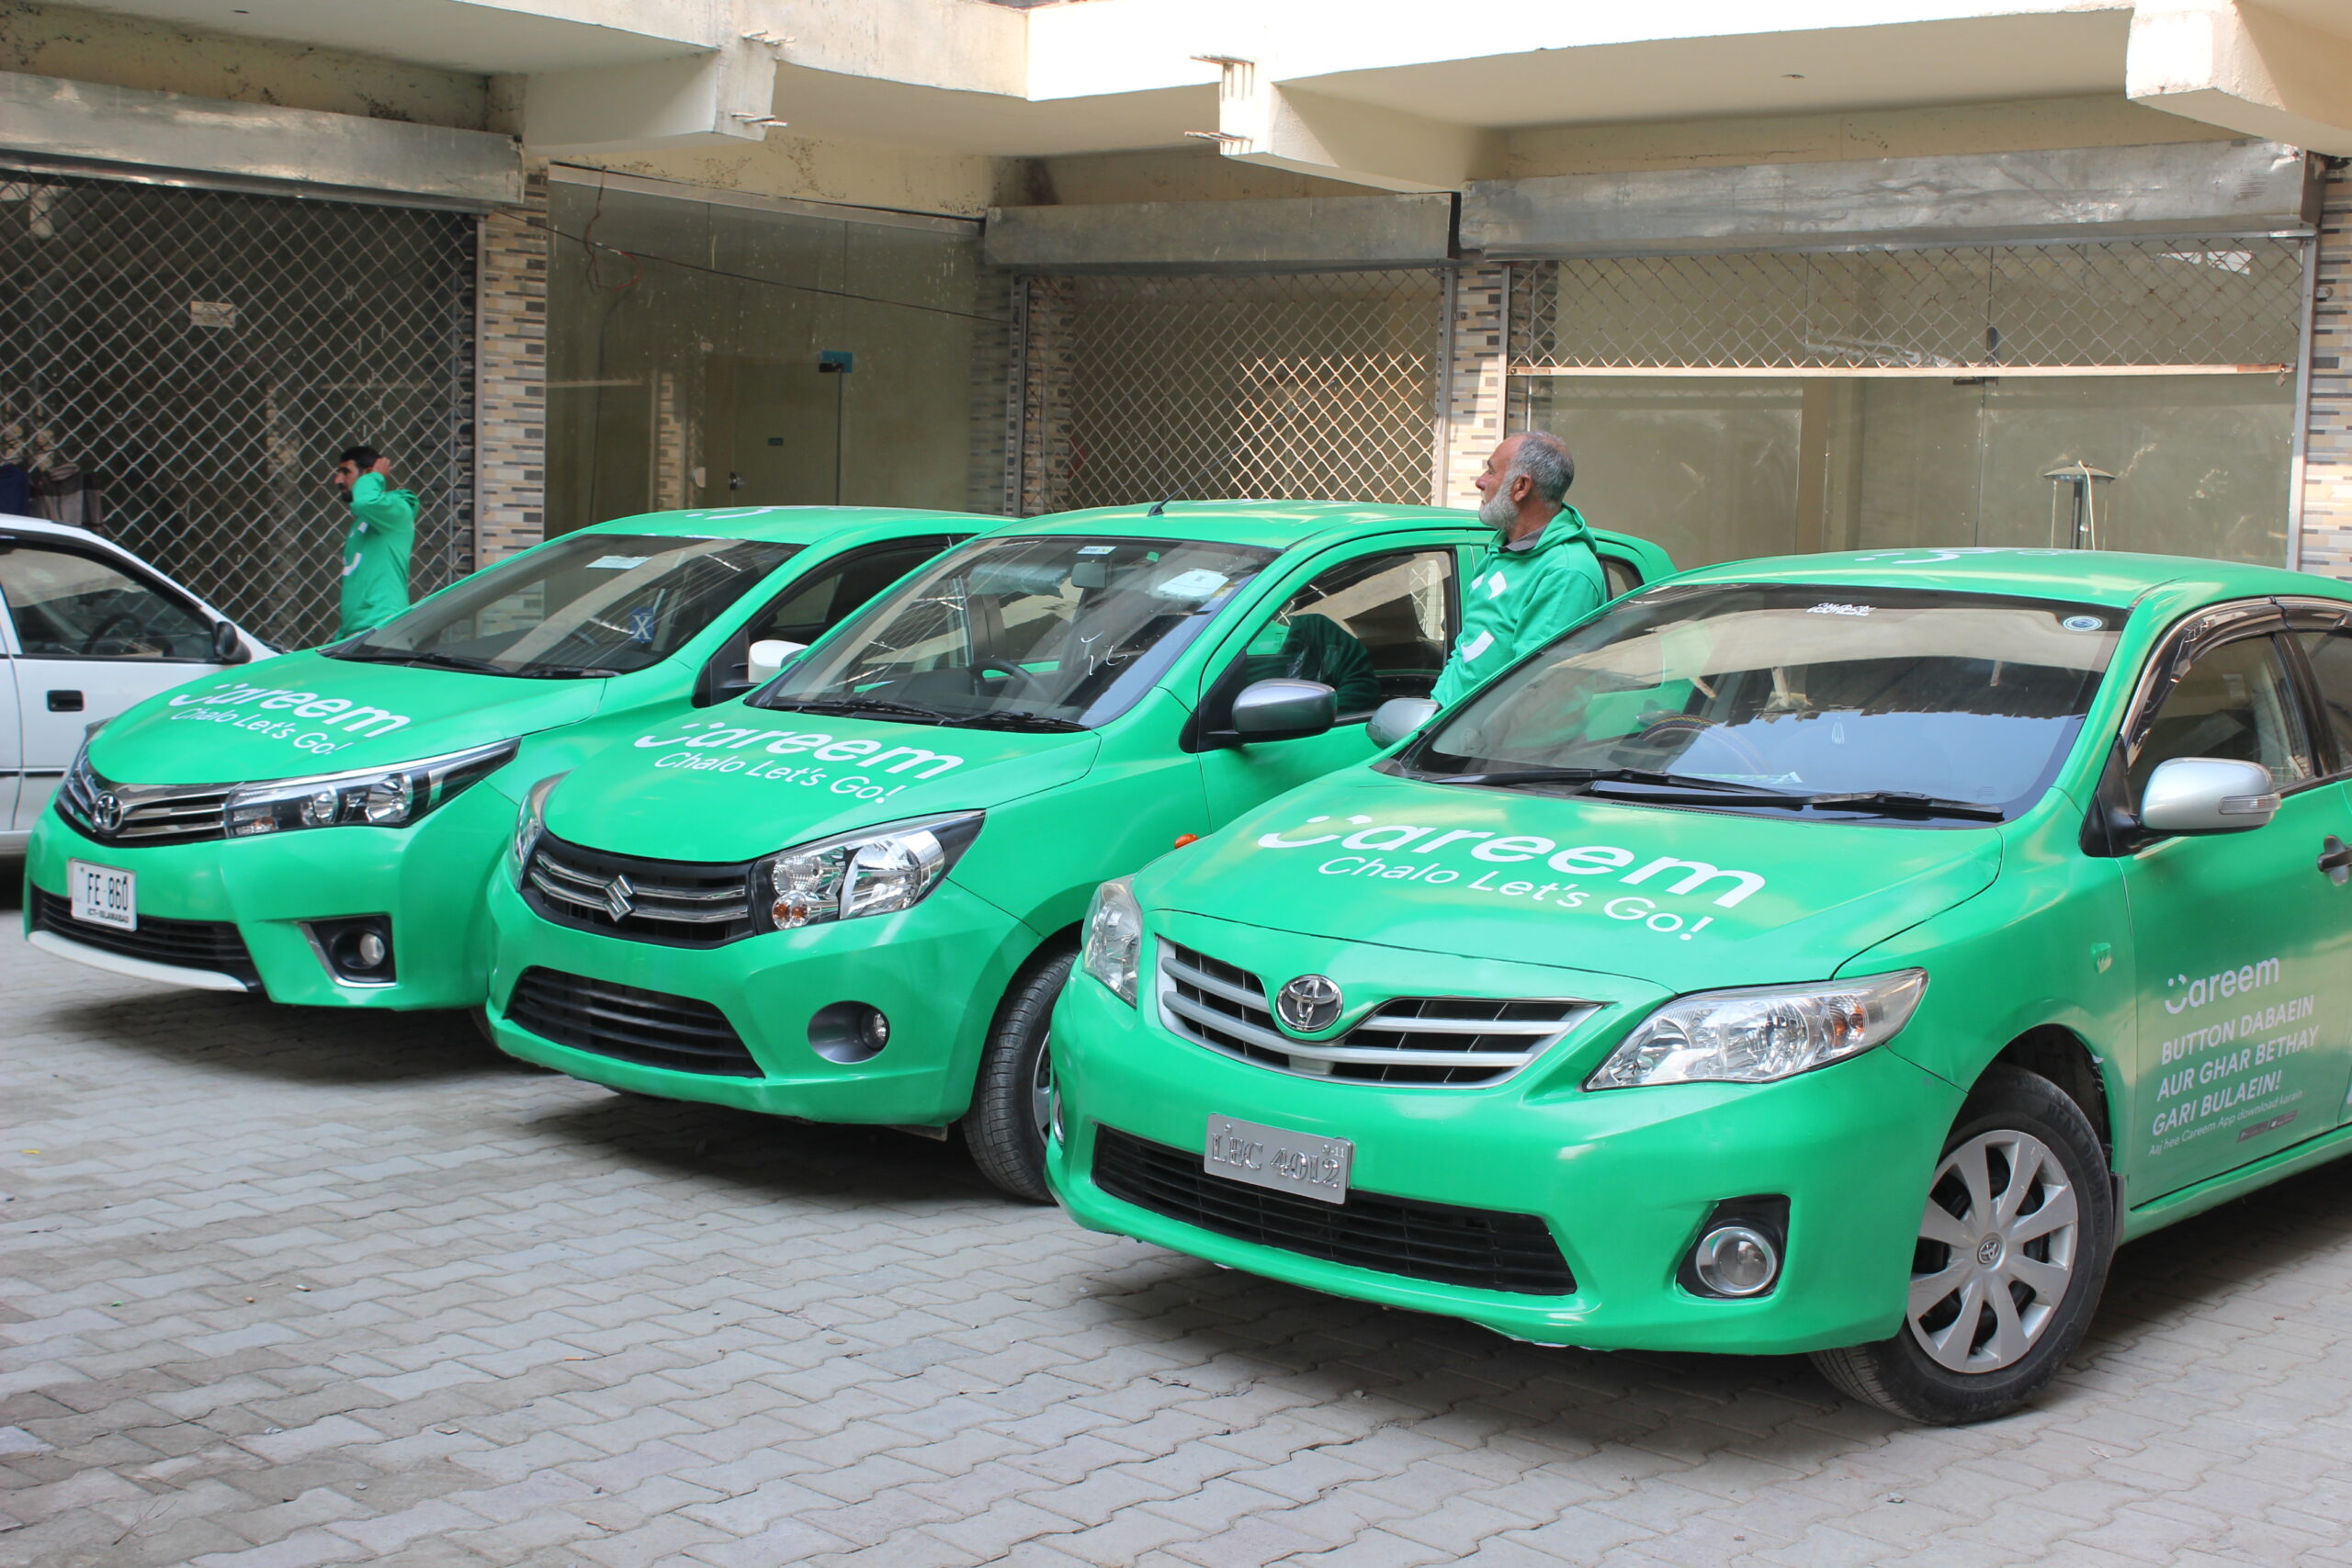 Changes are afoot at Careem. What do they mean for the fast changing ride-hailing sector?